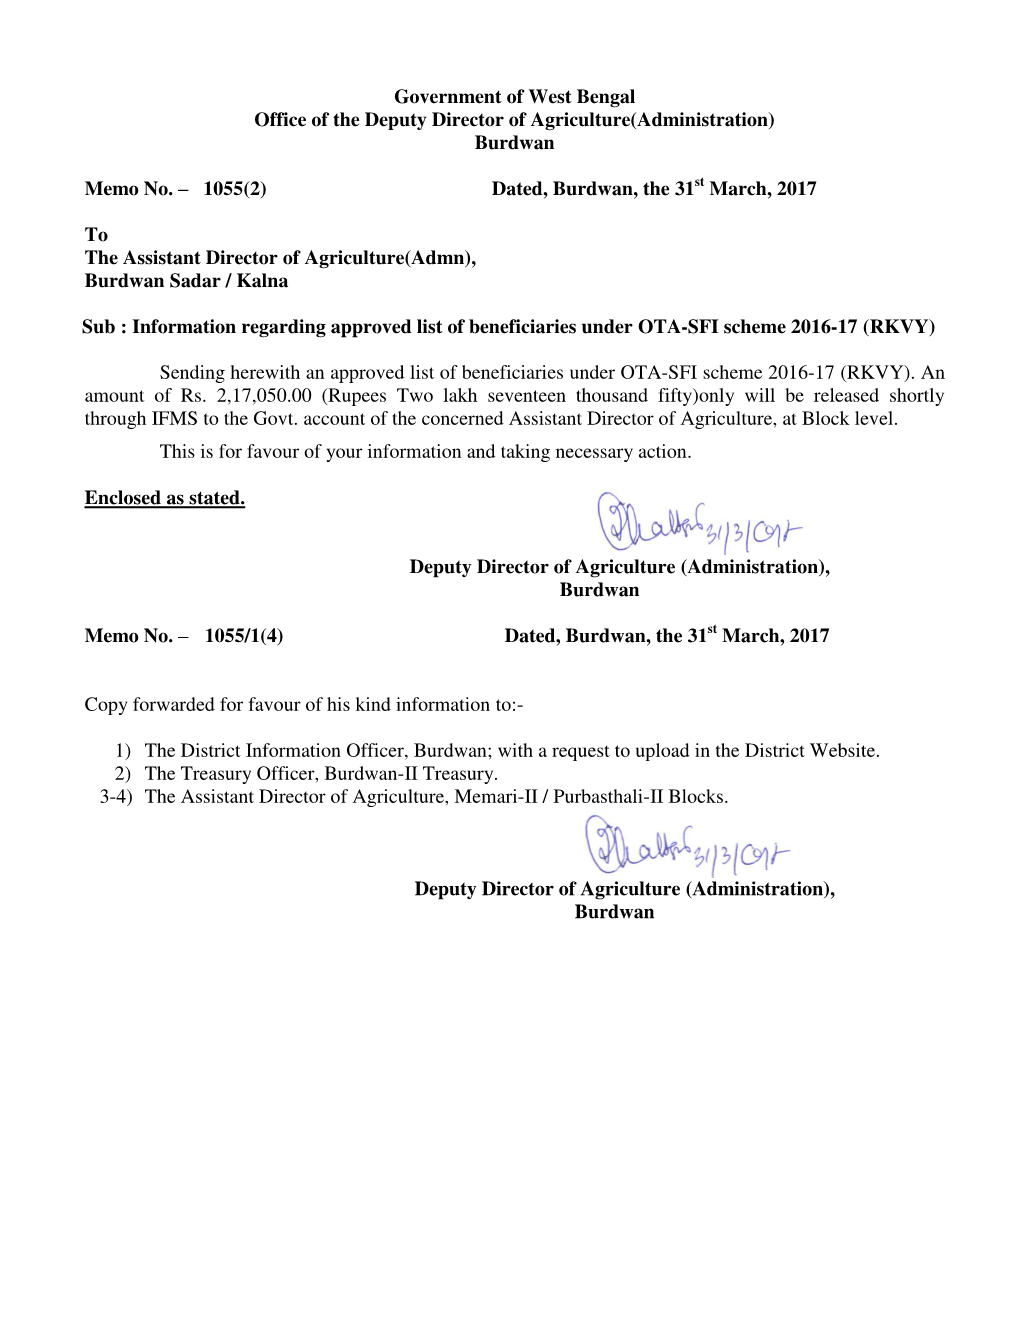 Government of West Bengal Office of the Deputy Director of Agriculture(Administration) Burdwan